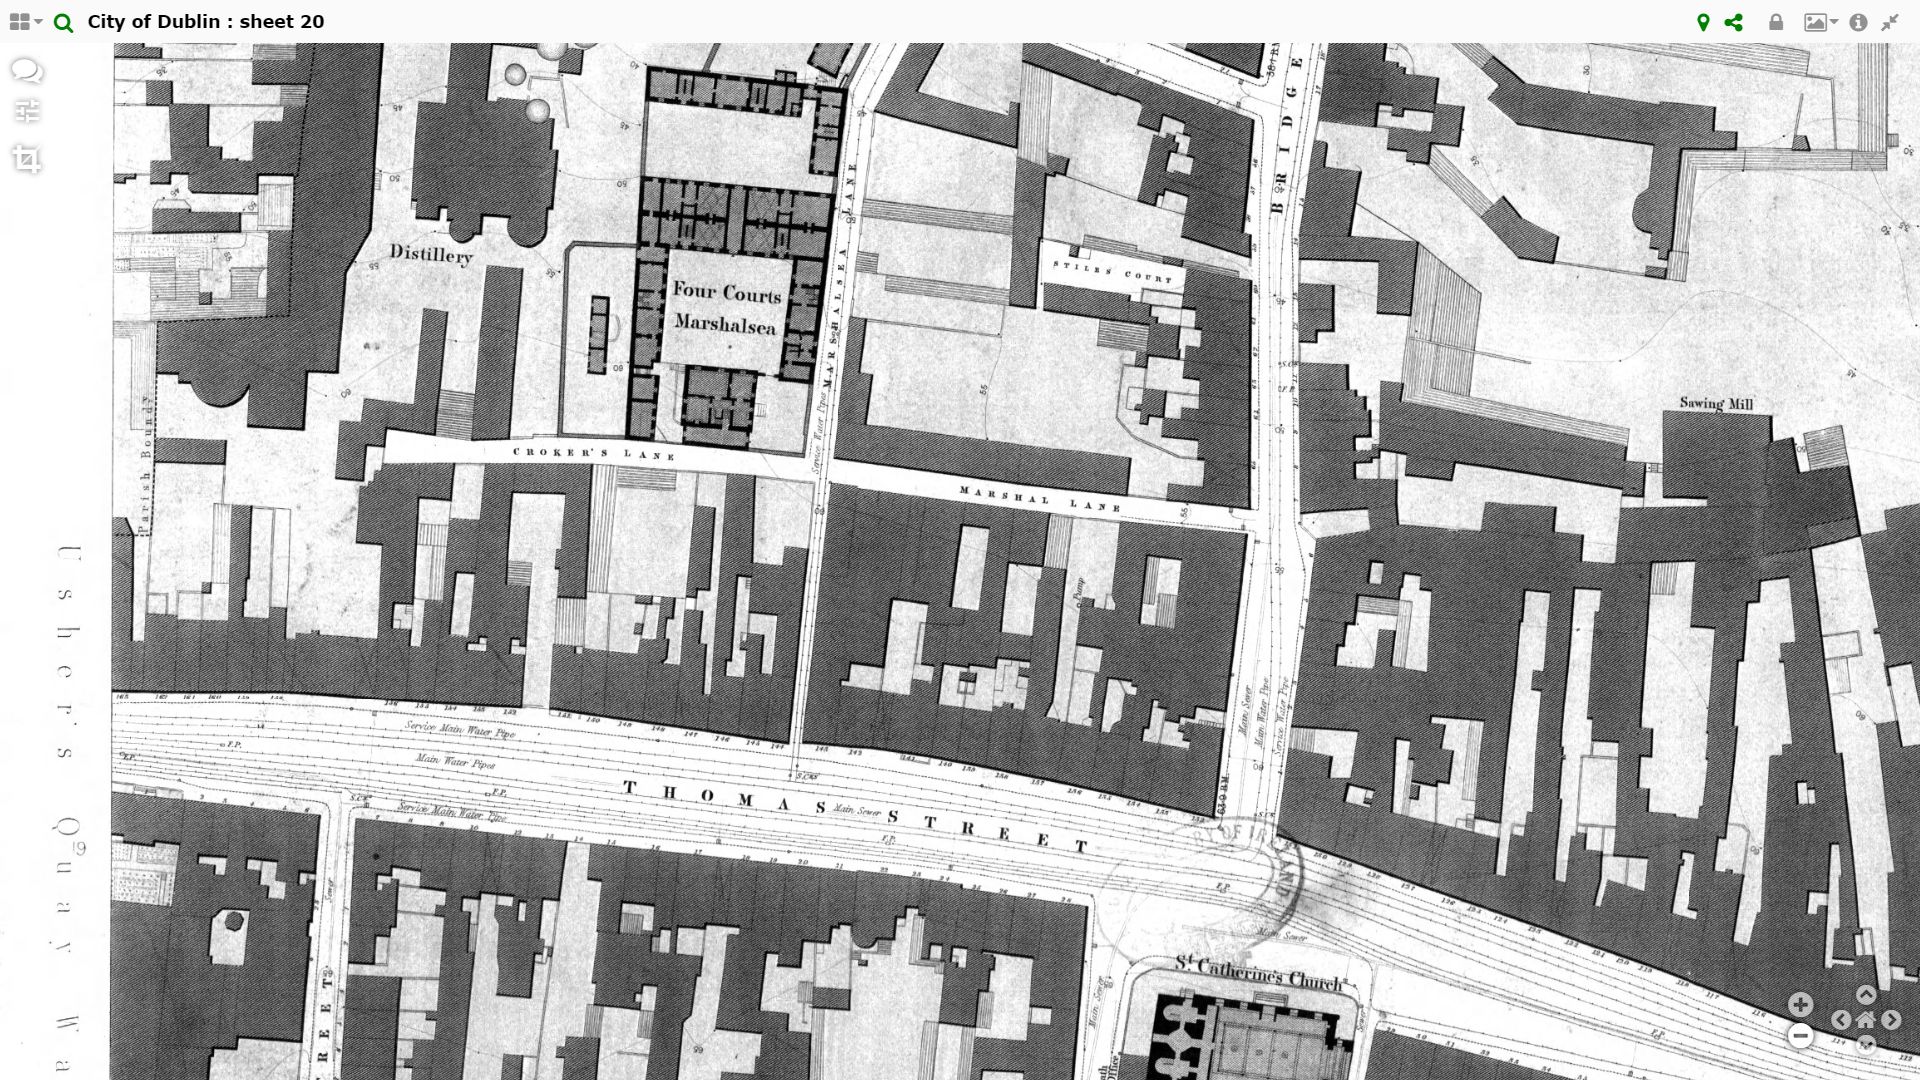 Detail from the 1847 Ordnance survey map of Dublin showing the loation of the Four Courts Marshalsea just of Thomas Street.